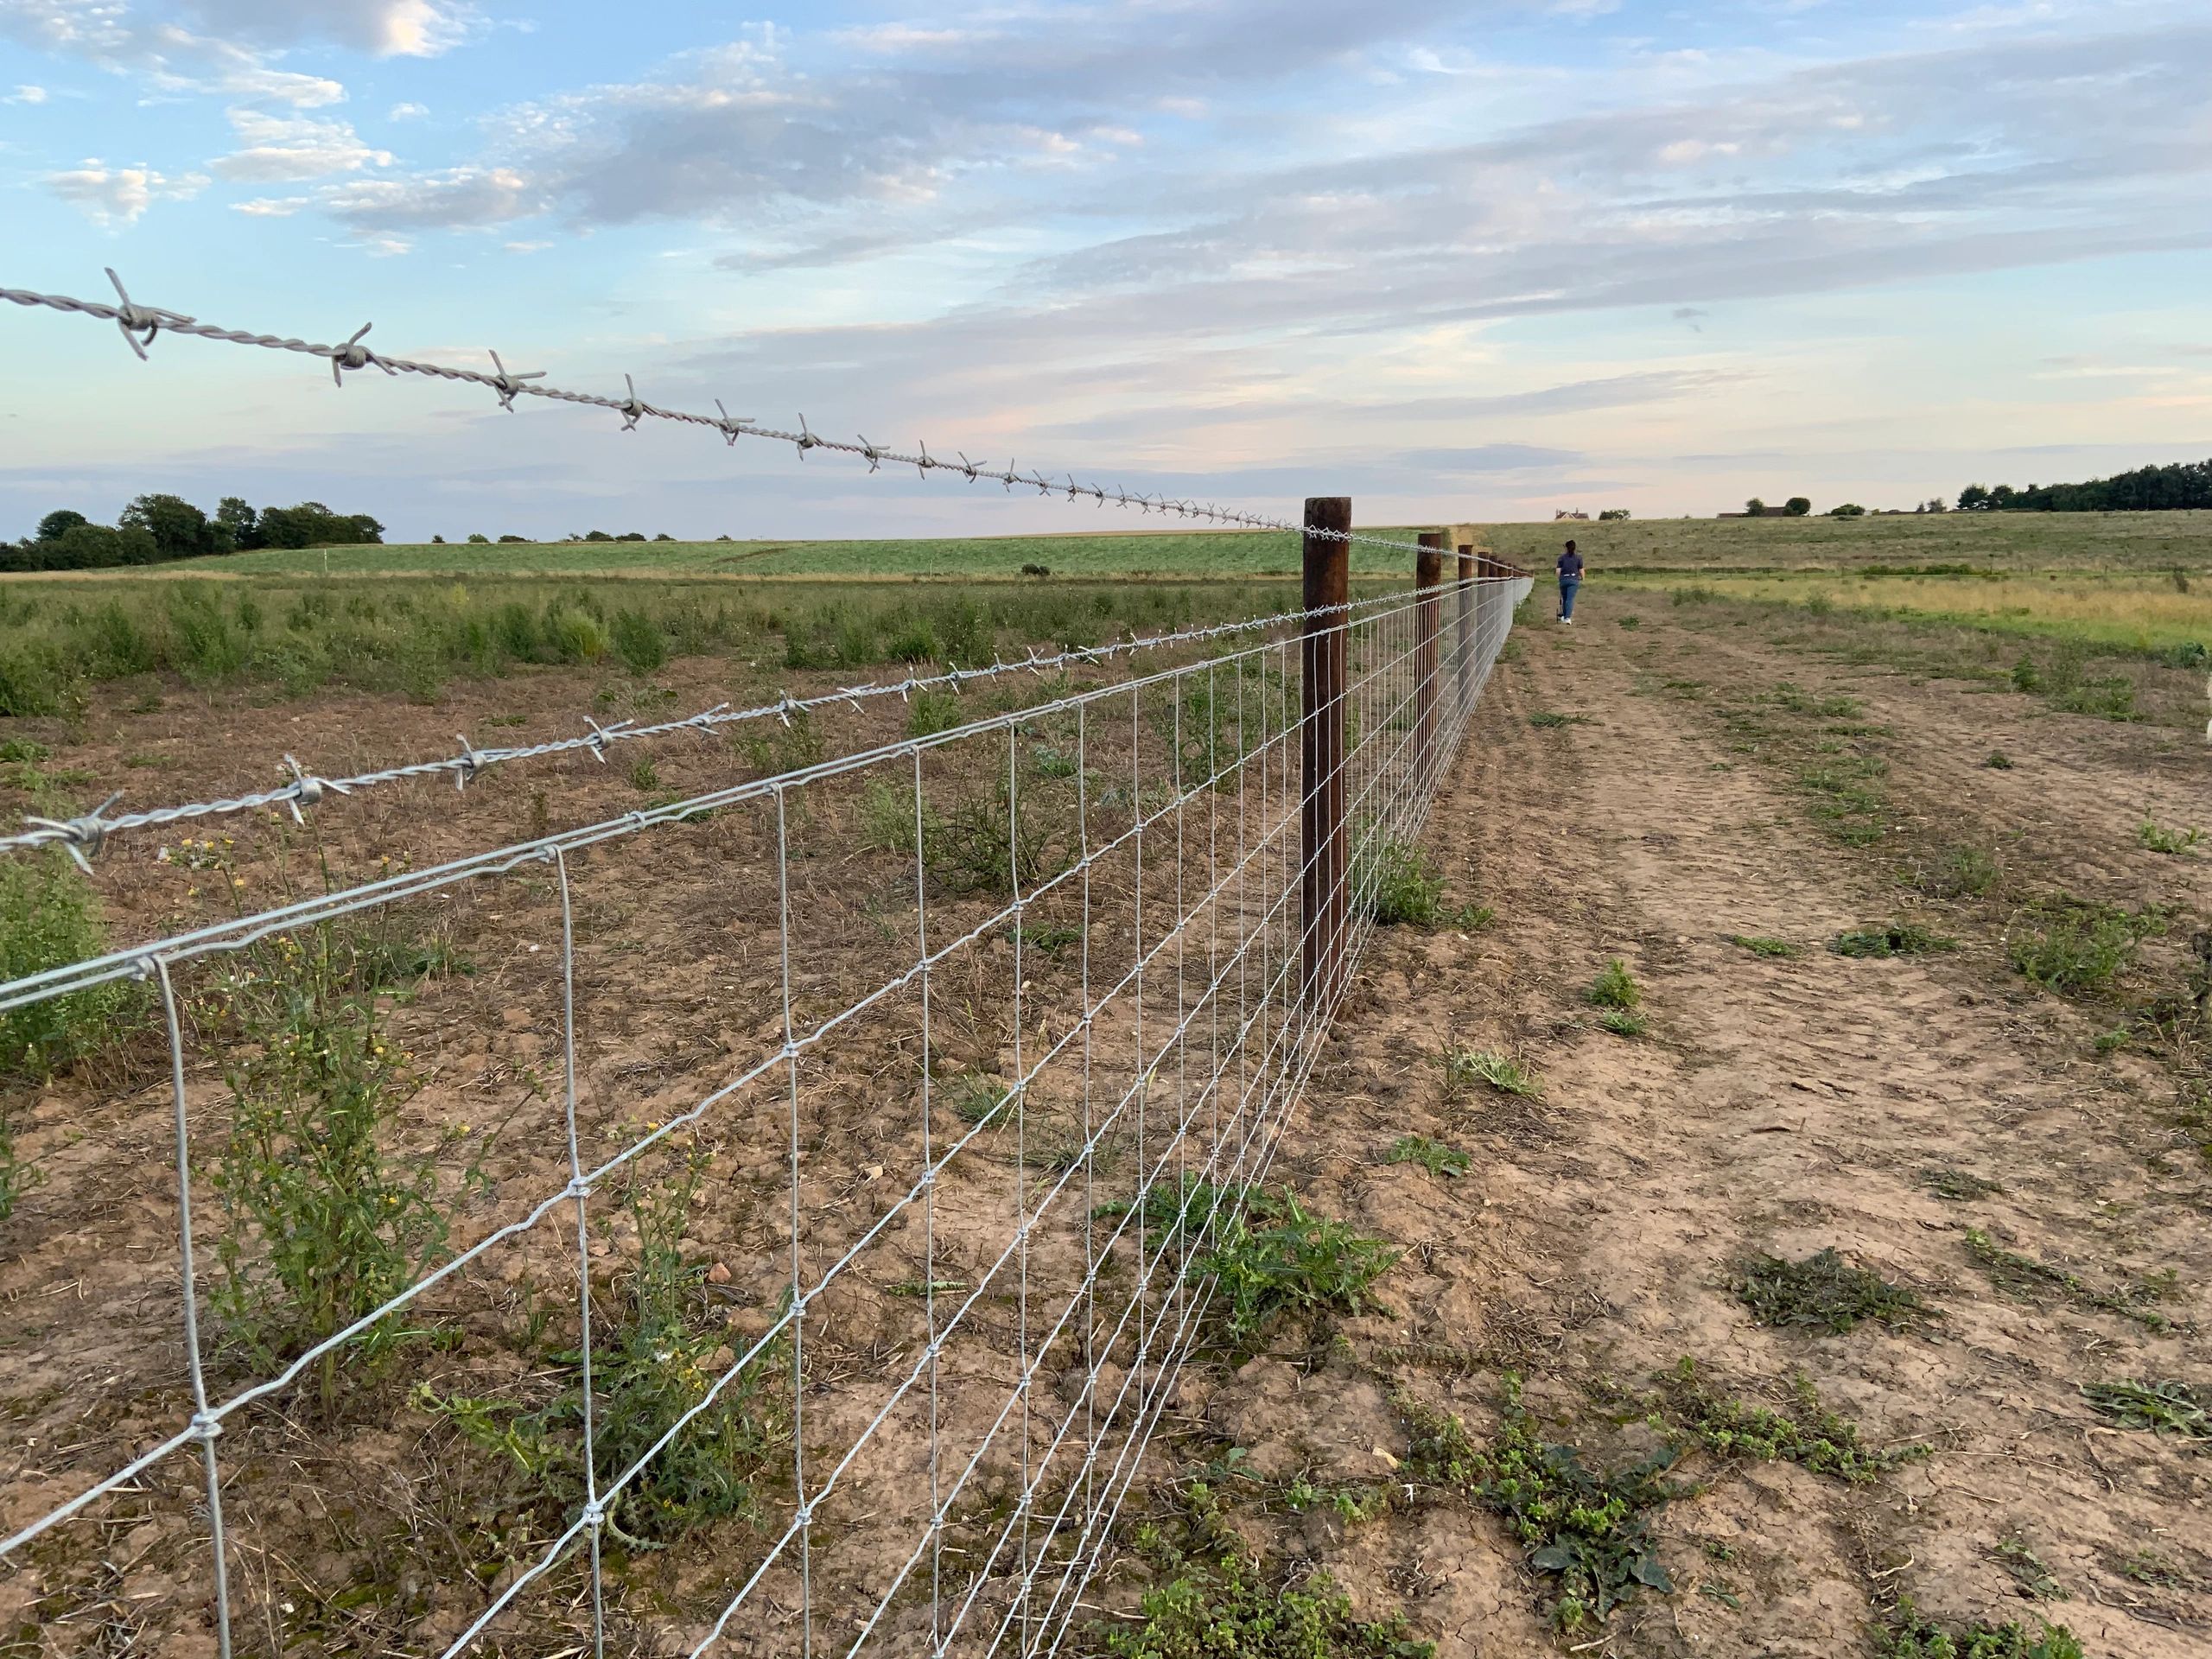 Barbed fence running through a field held by wooden posts